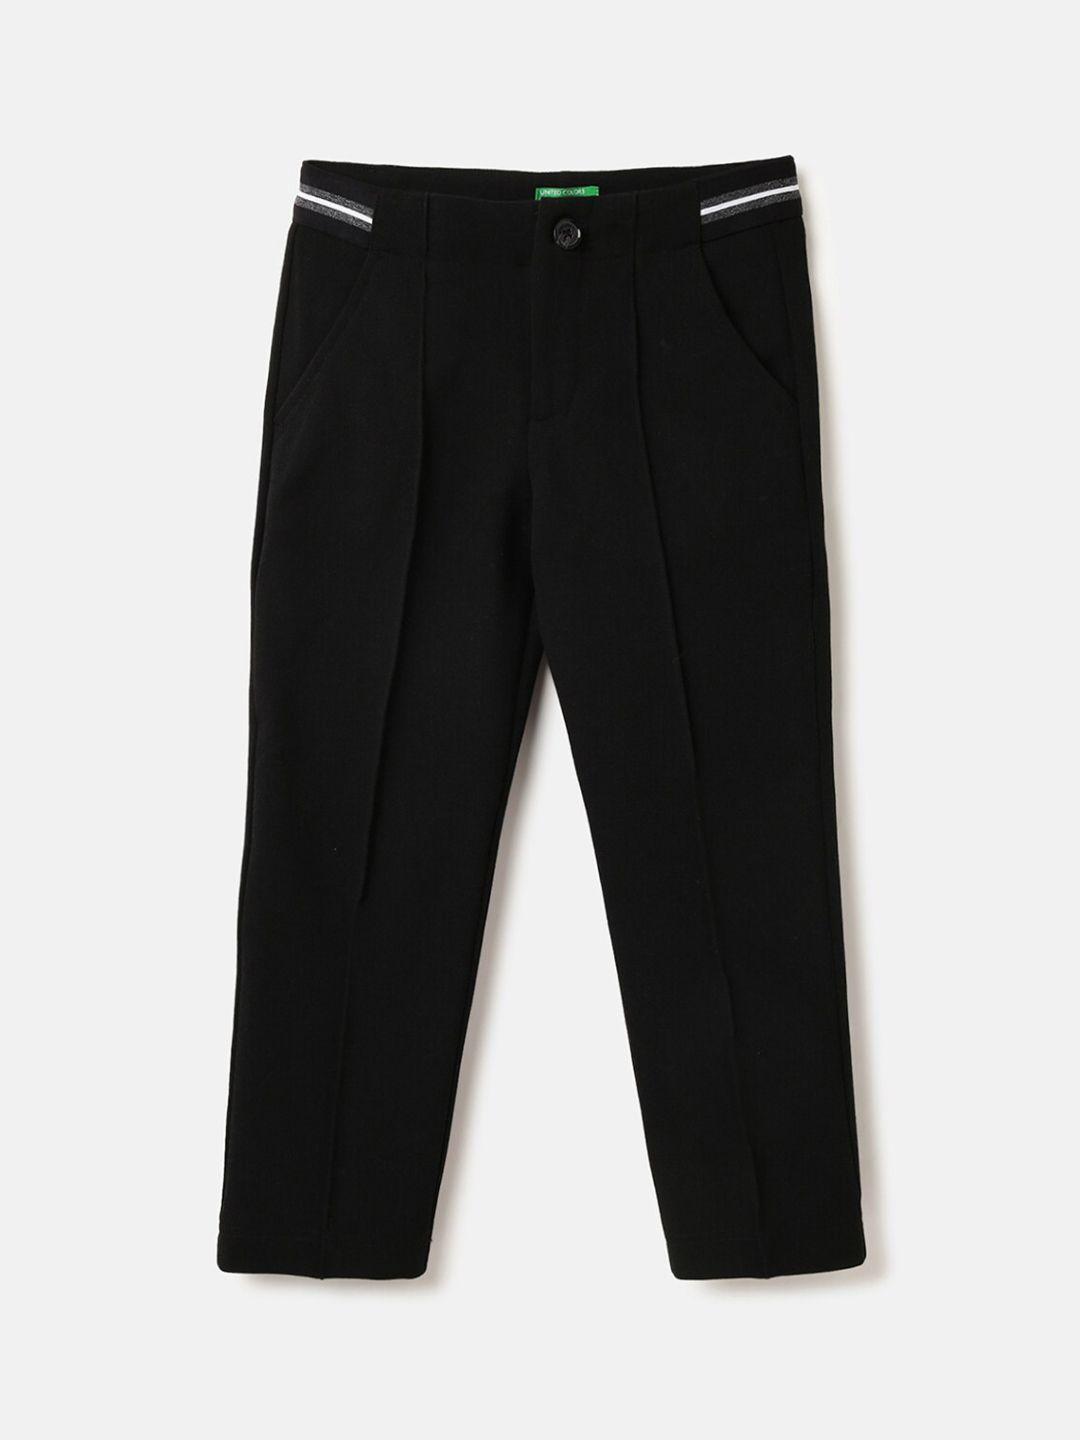 united-colors-of-benetton-boys-slim-fit-pleated-trousers